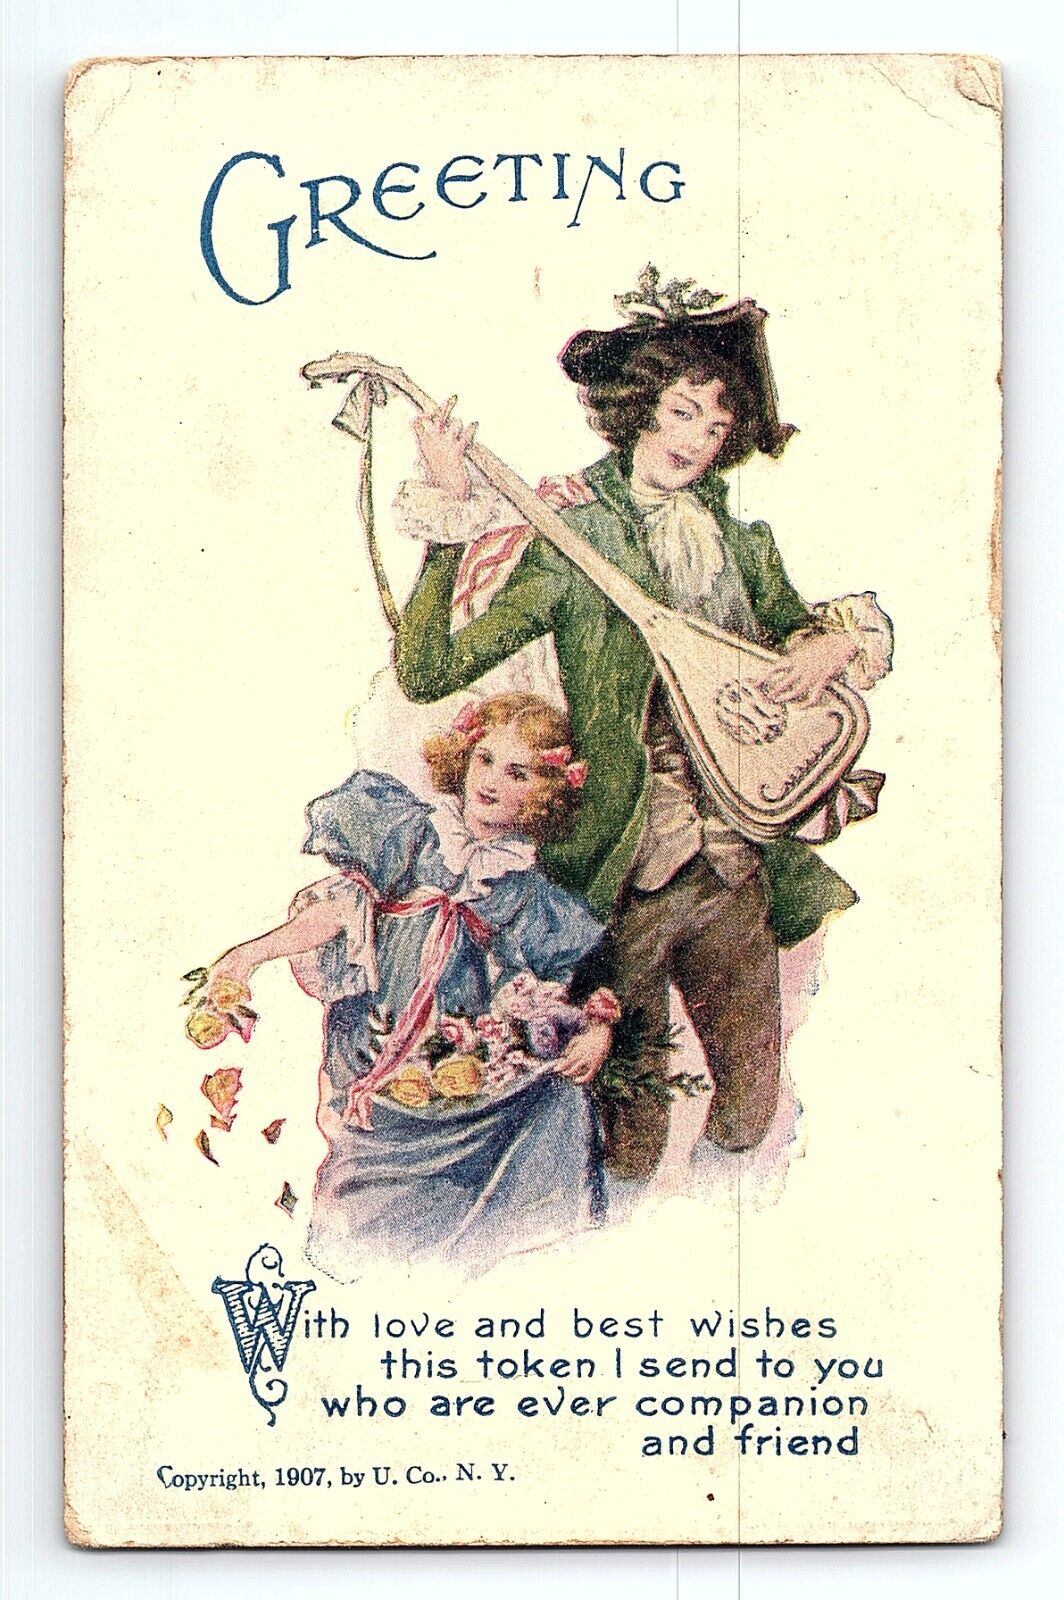 Man Woman Lady Guitar Music Flowers Best Wishes Greeting Card Vintage Postcard